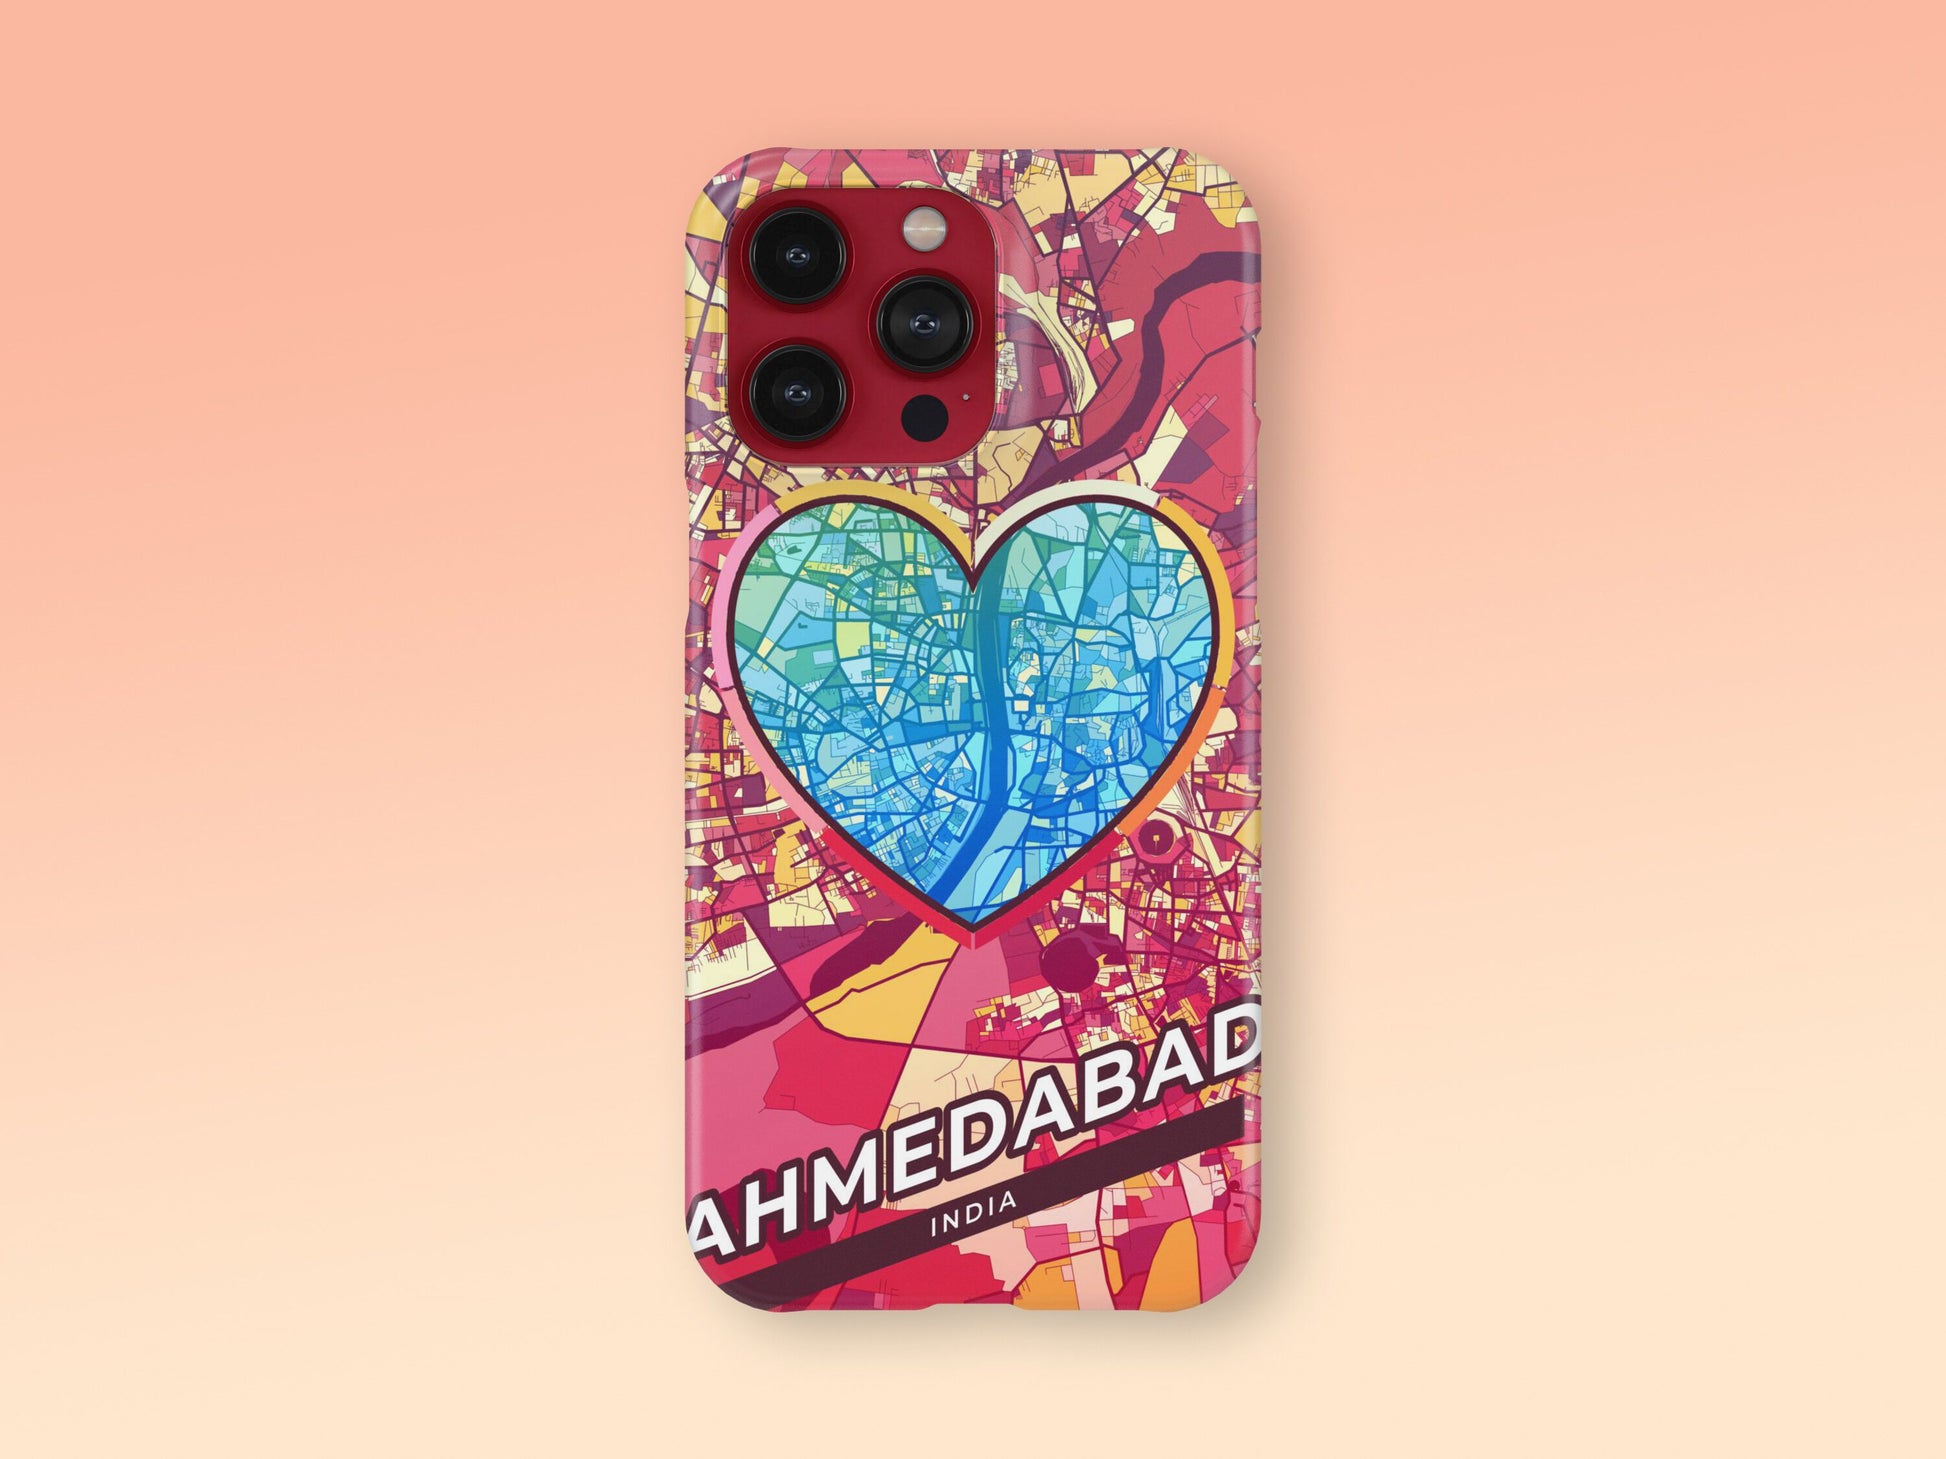 Ahmedabad India slim phone case with colorful icon. Birthday, wedding or housewarming gift. Couple match cases. 2